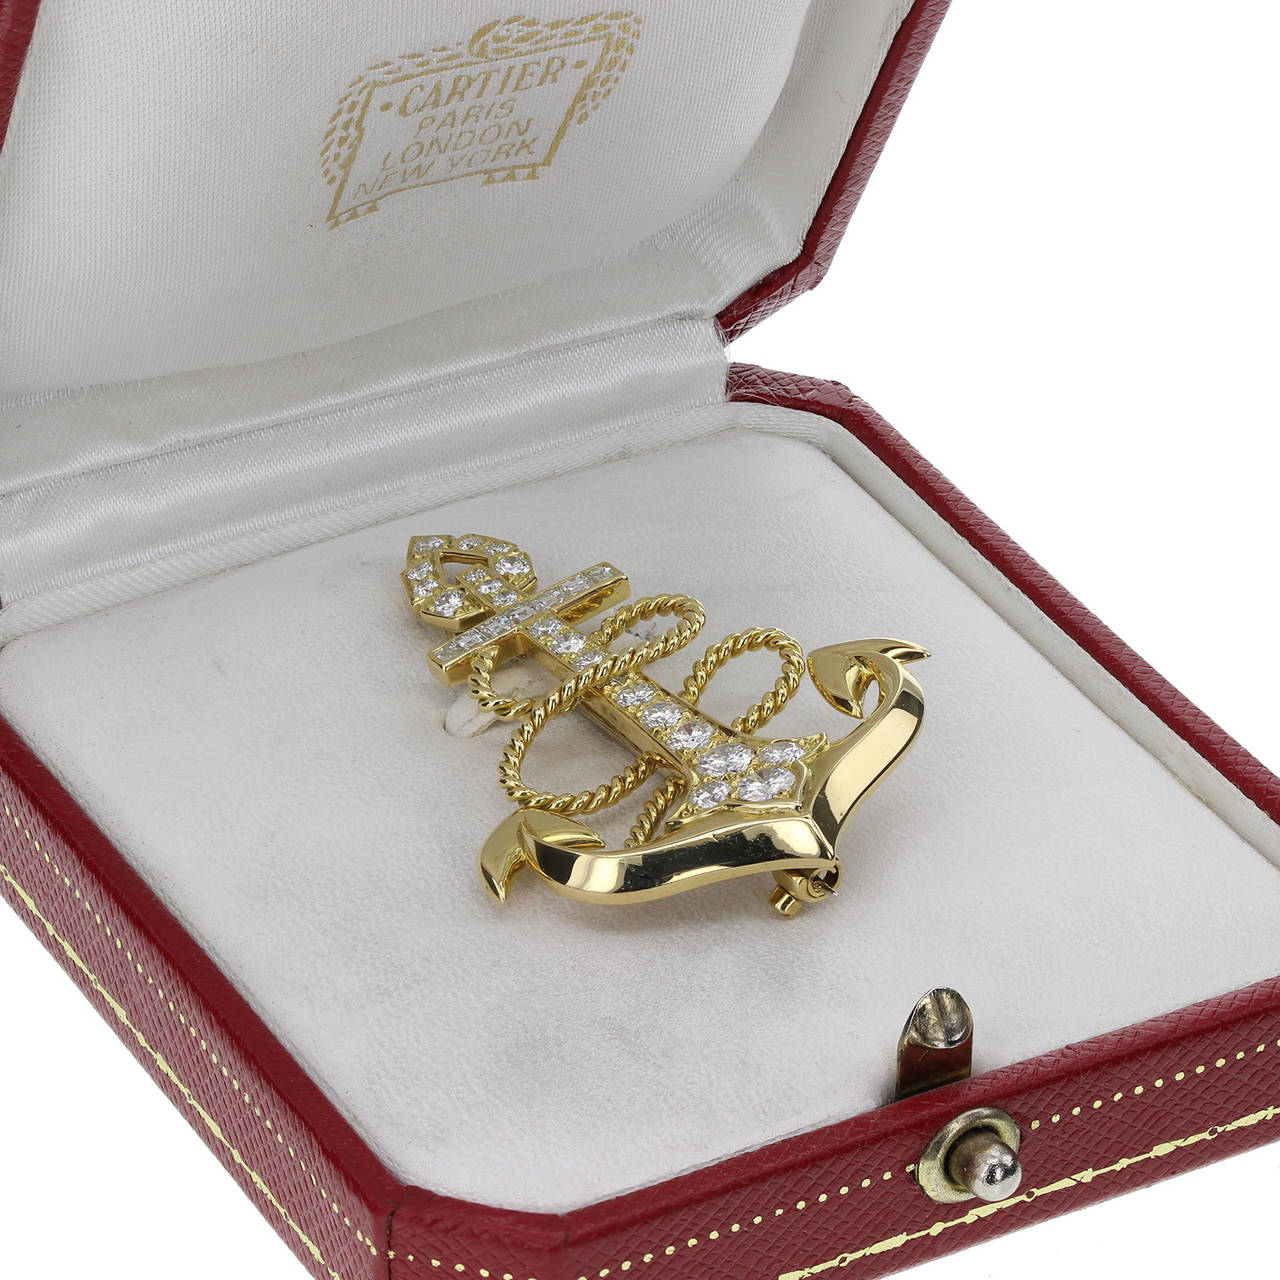 Cartier Diamond Gold Nautical Anchor Brooch In Excellent Condition For Sale In Newcastle Upon Tyne, GB